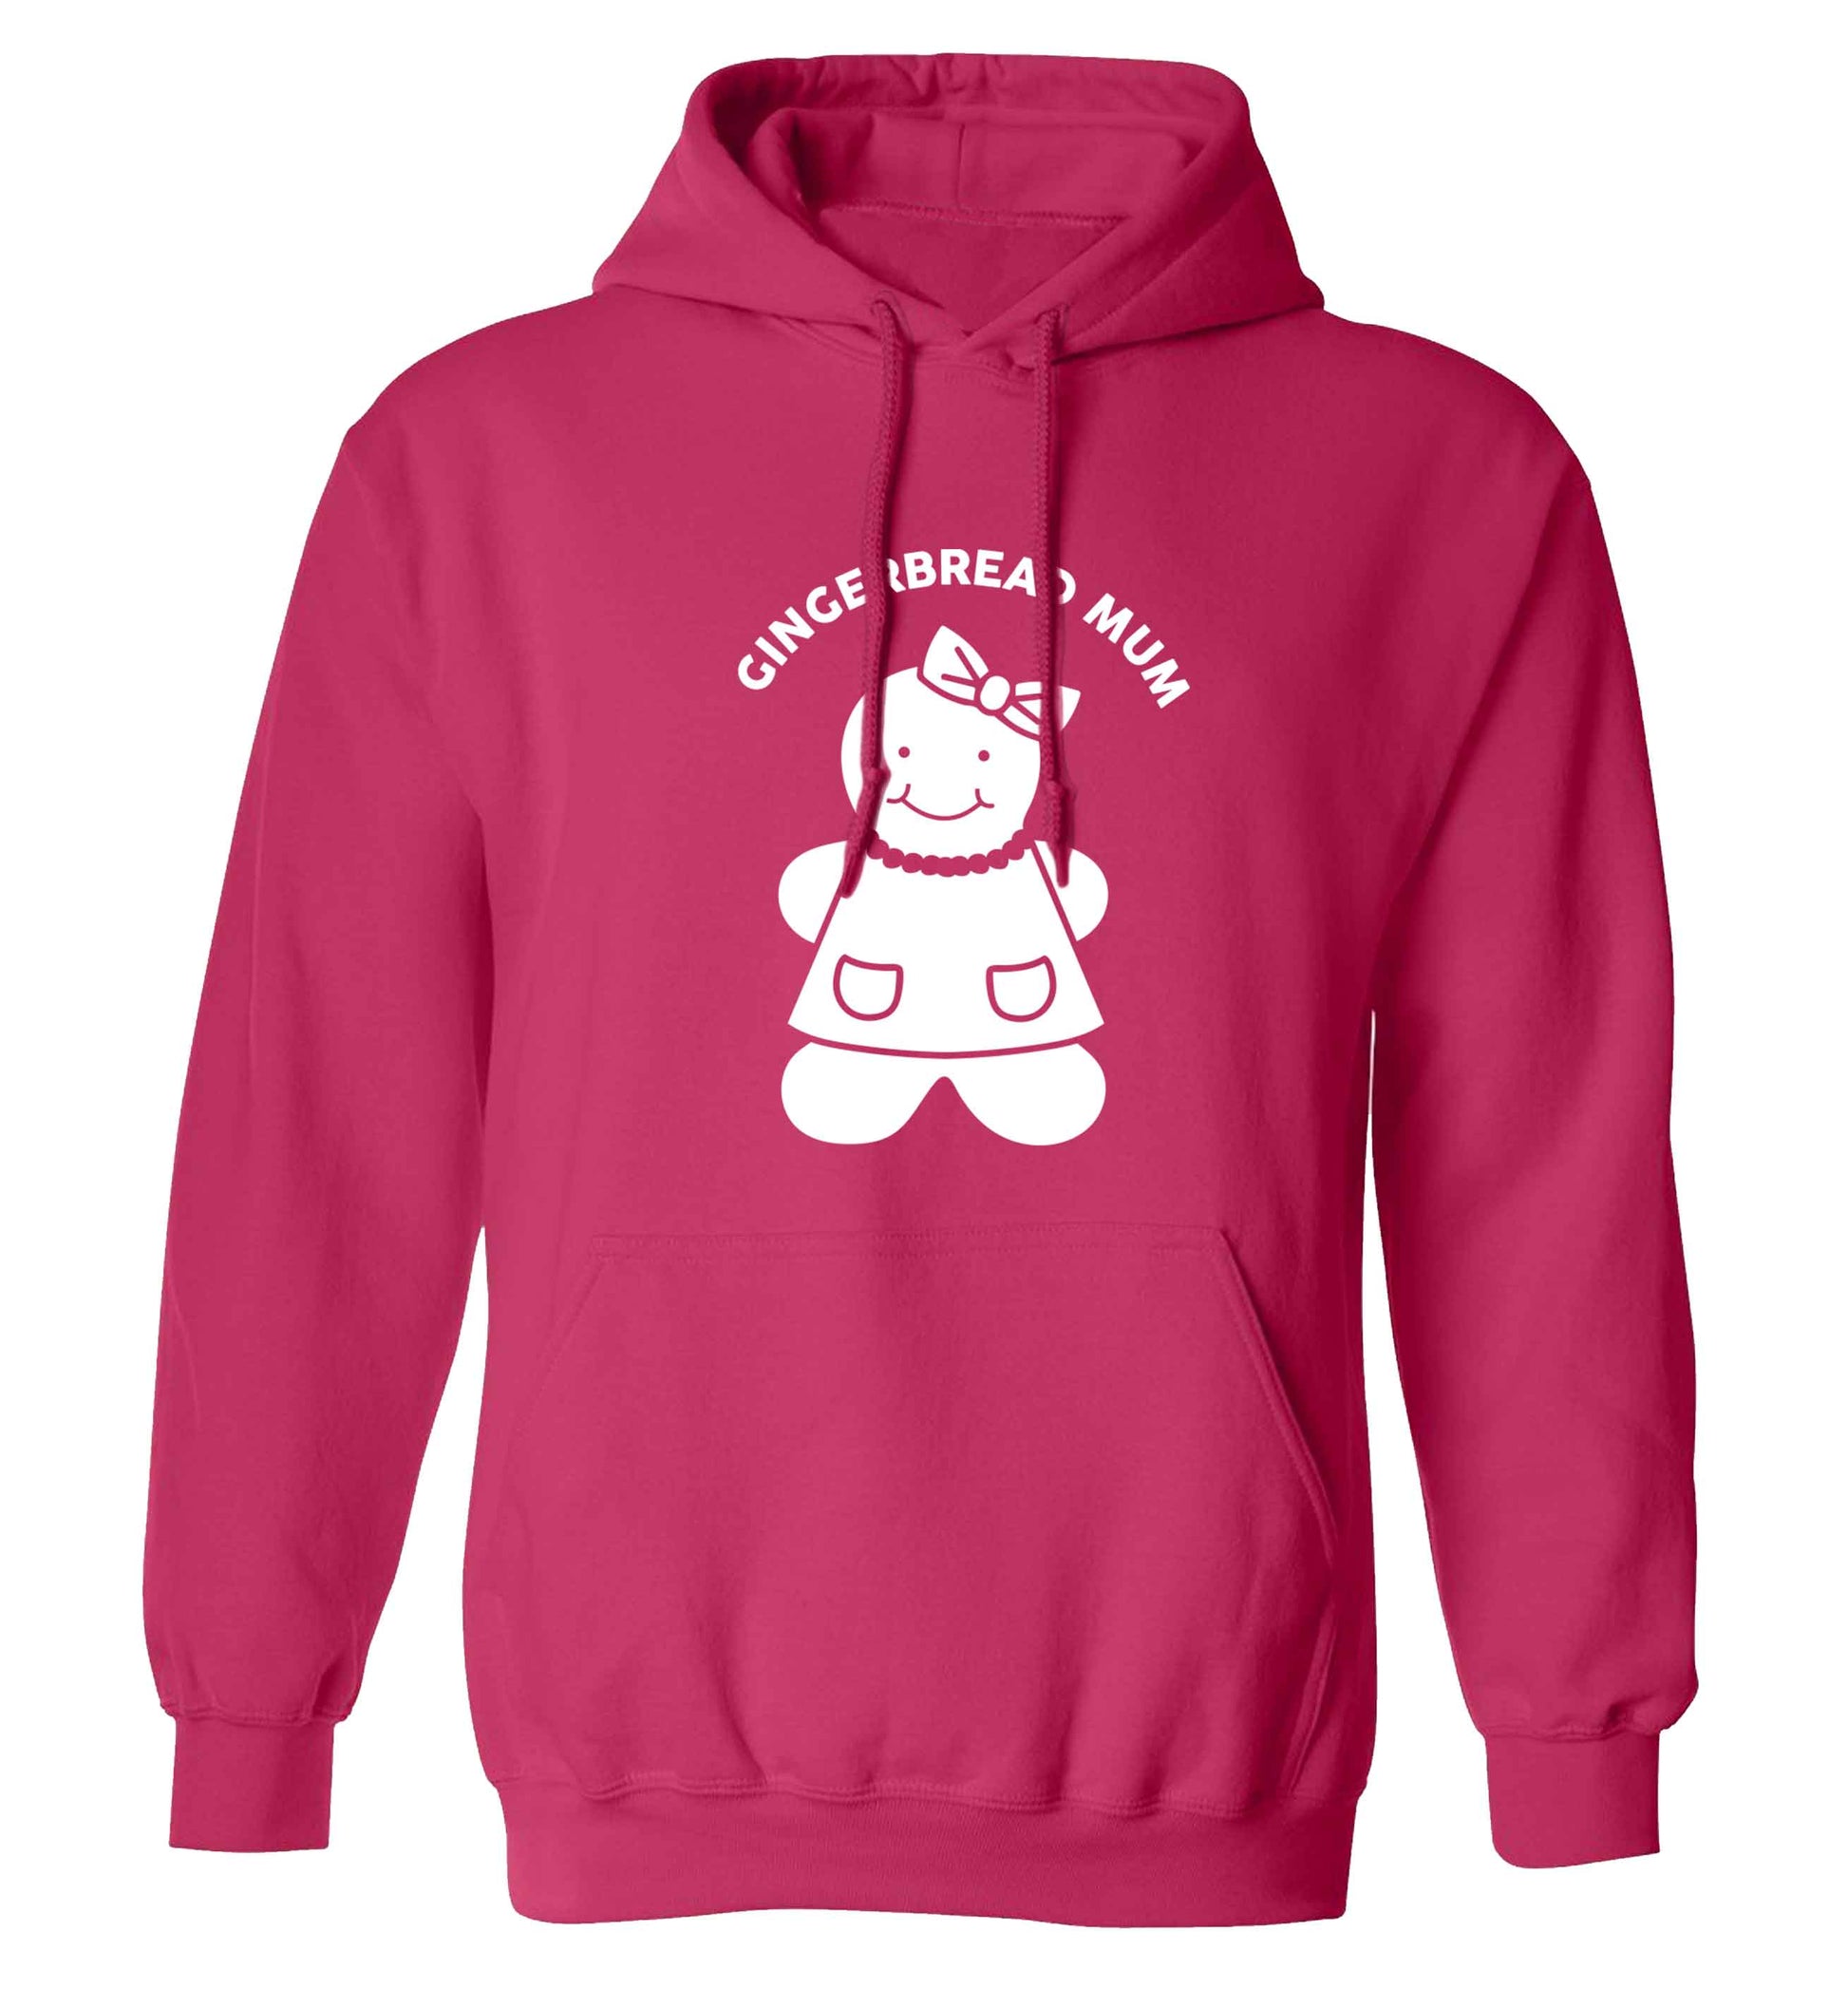 Merry Christmas adults unisex pink hoodie 2XL